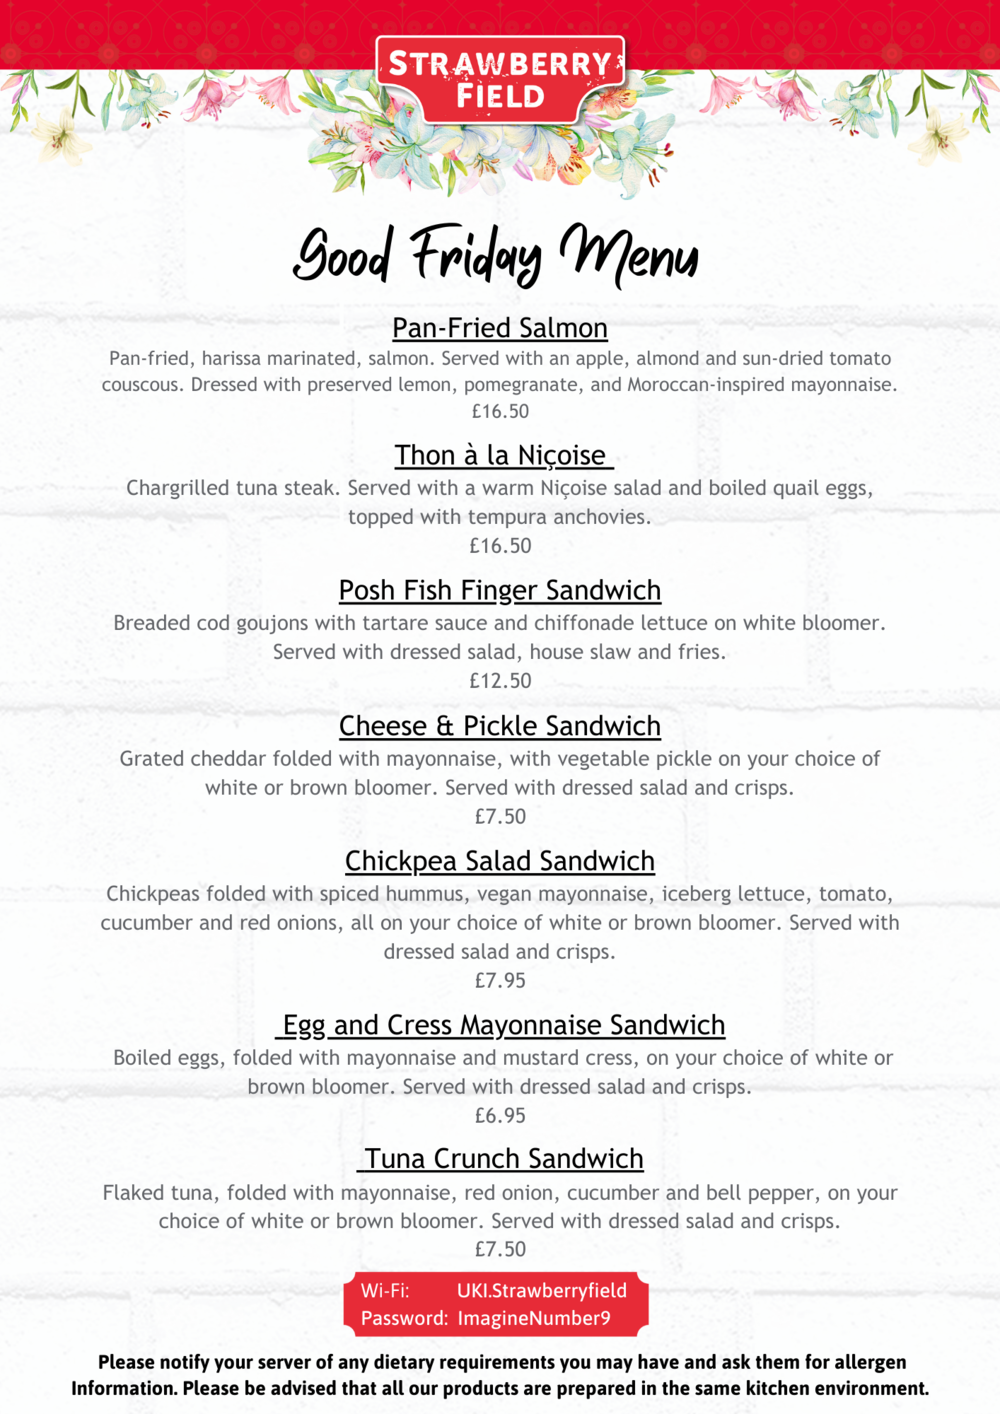 Good Friday lunch menu in the Imagine More Cafe at Strawberry Field Liverpool